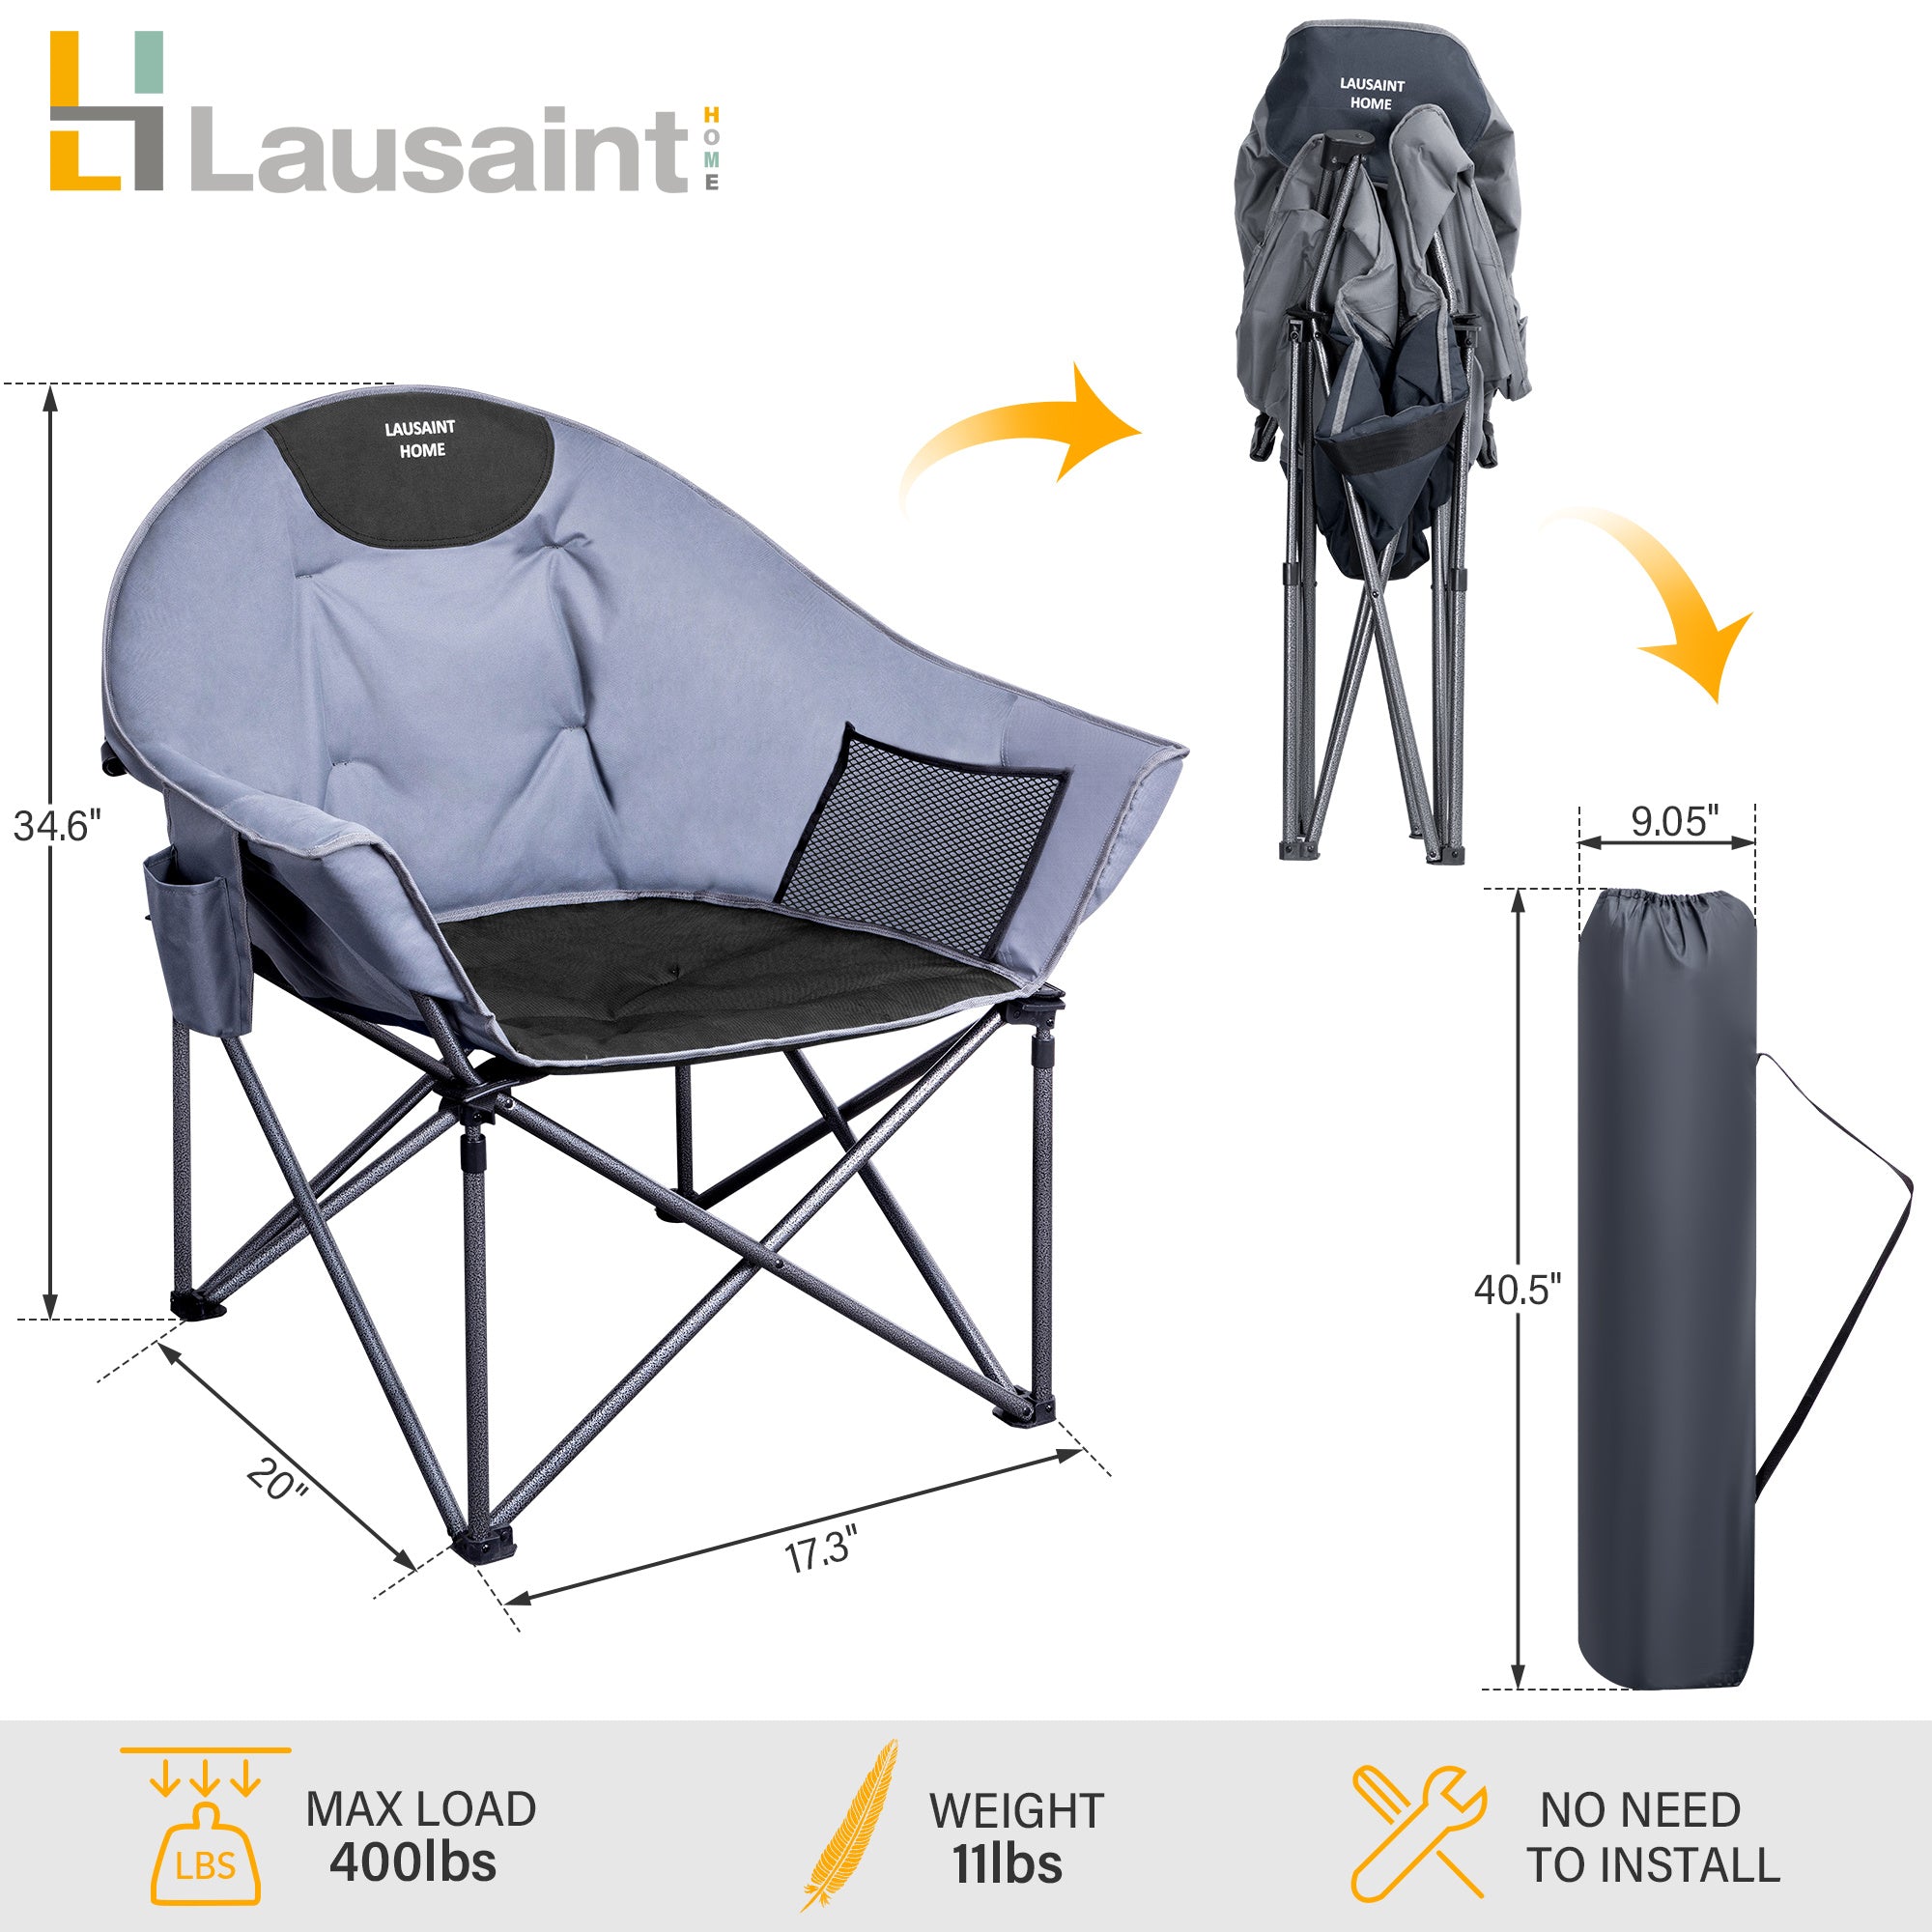 Oversized Camping Chairs, Folding with Carrying Bag, Lightweight Ergonomic Outdoor Lounge Chair